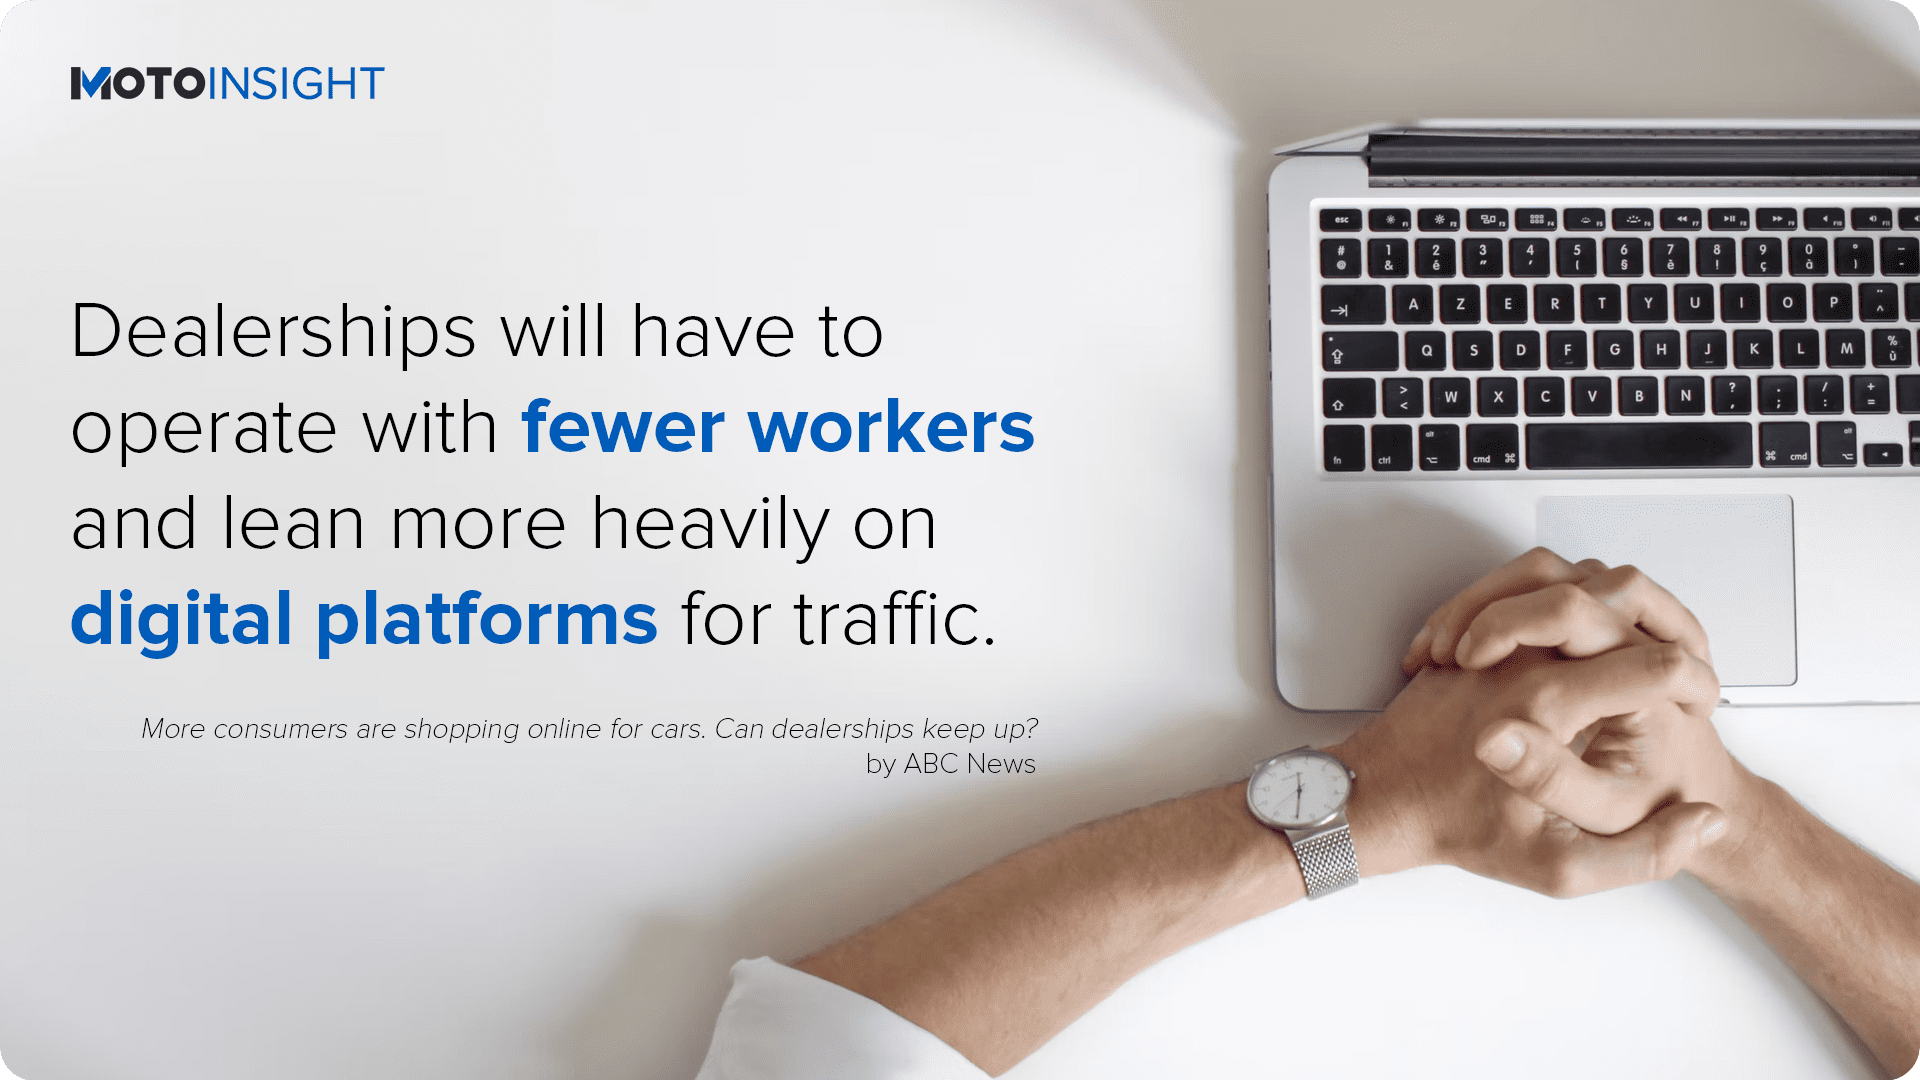 Dealerships will have to operate with fewer workers and lean more heavily on digital platforms for traffic. laptop